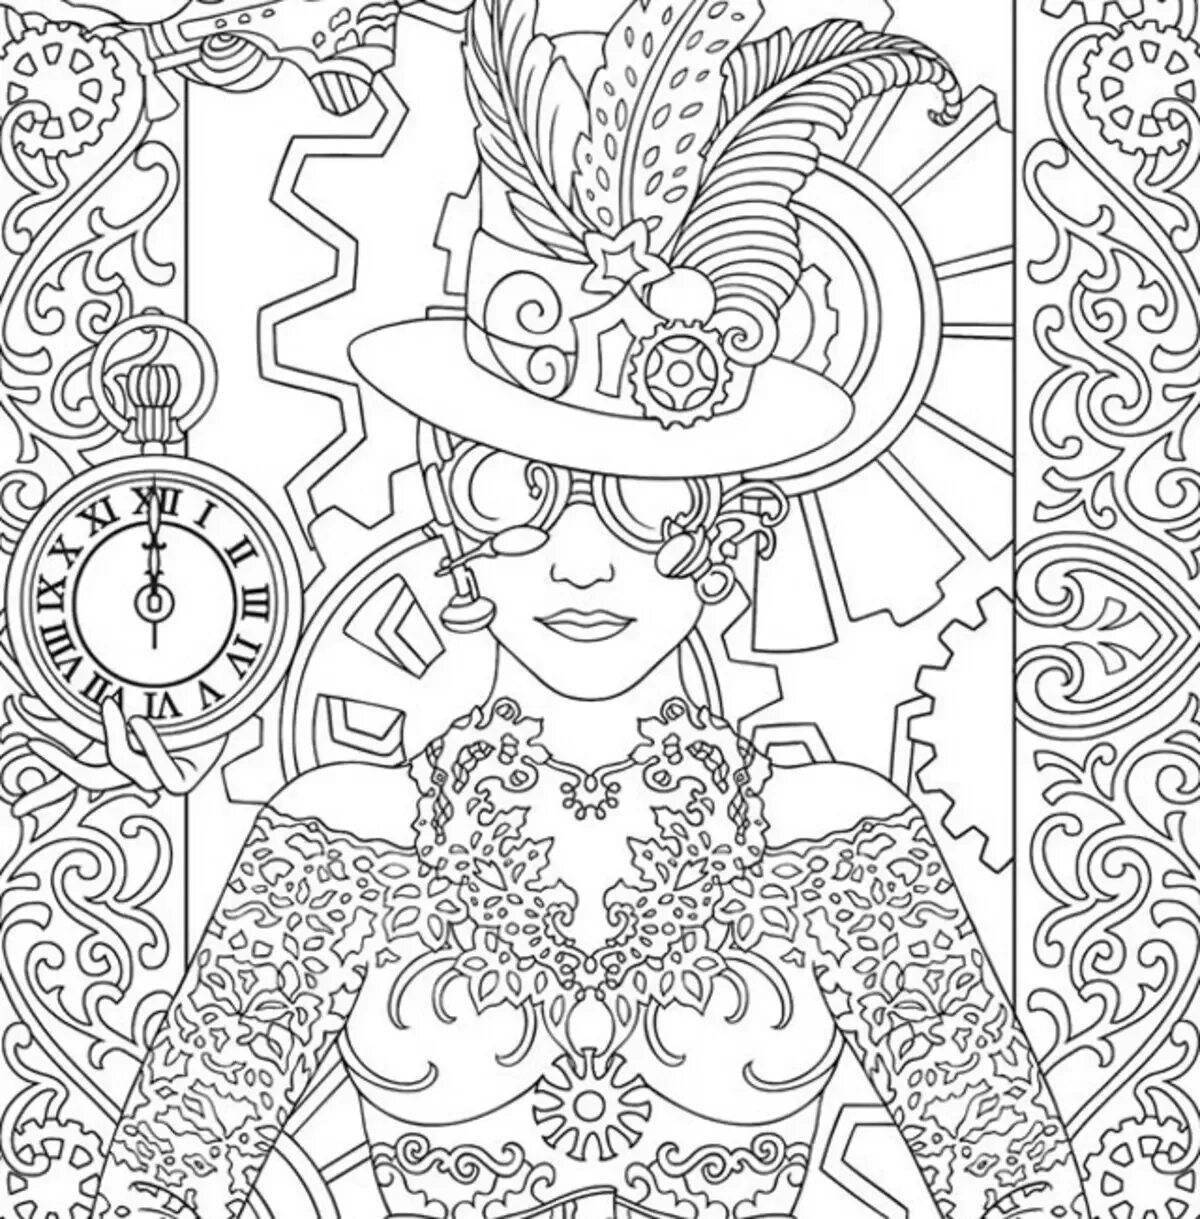 Touching antistress coloring book for adults 18